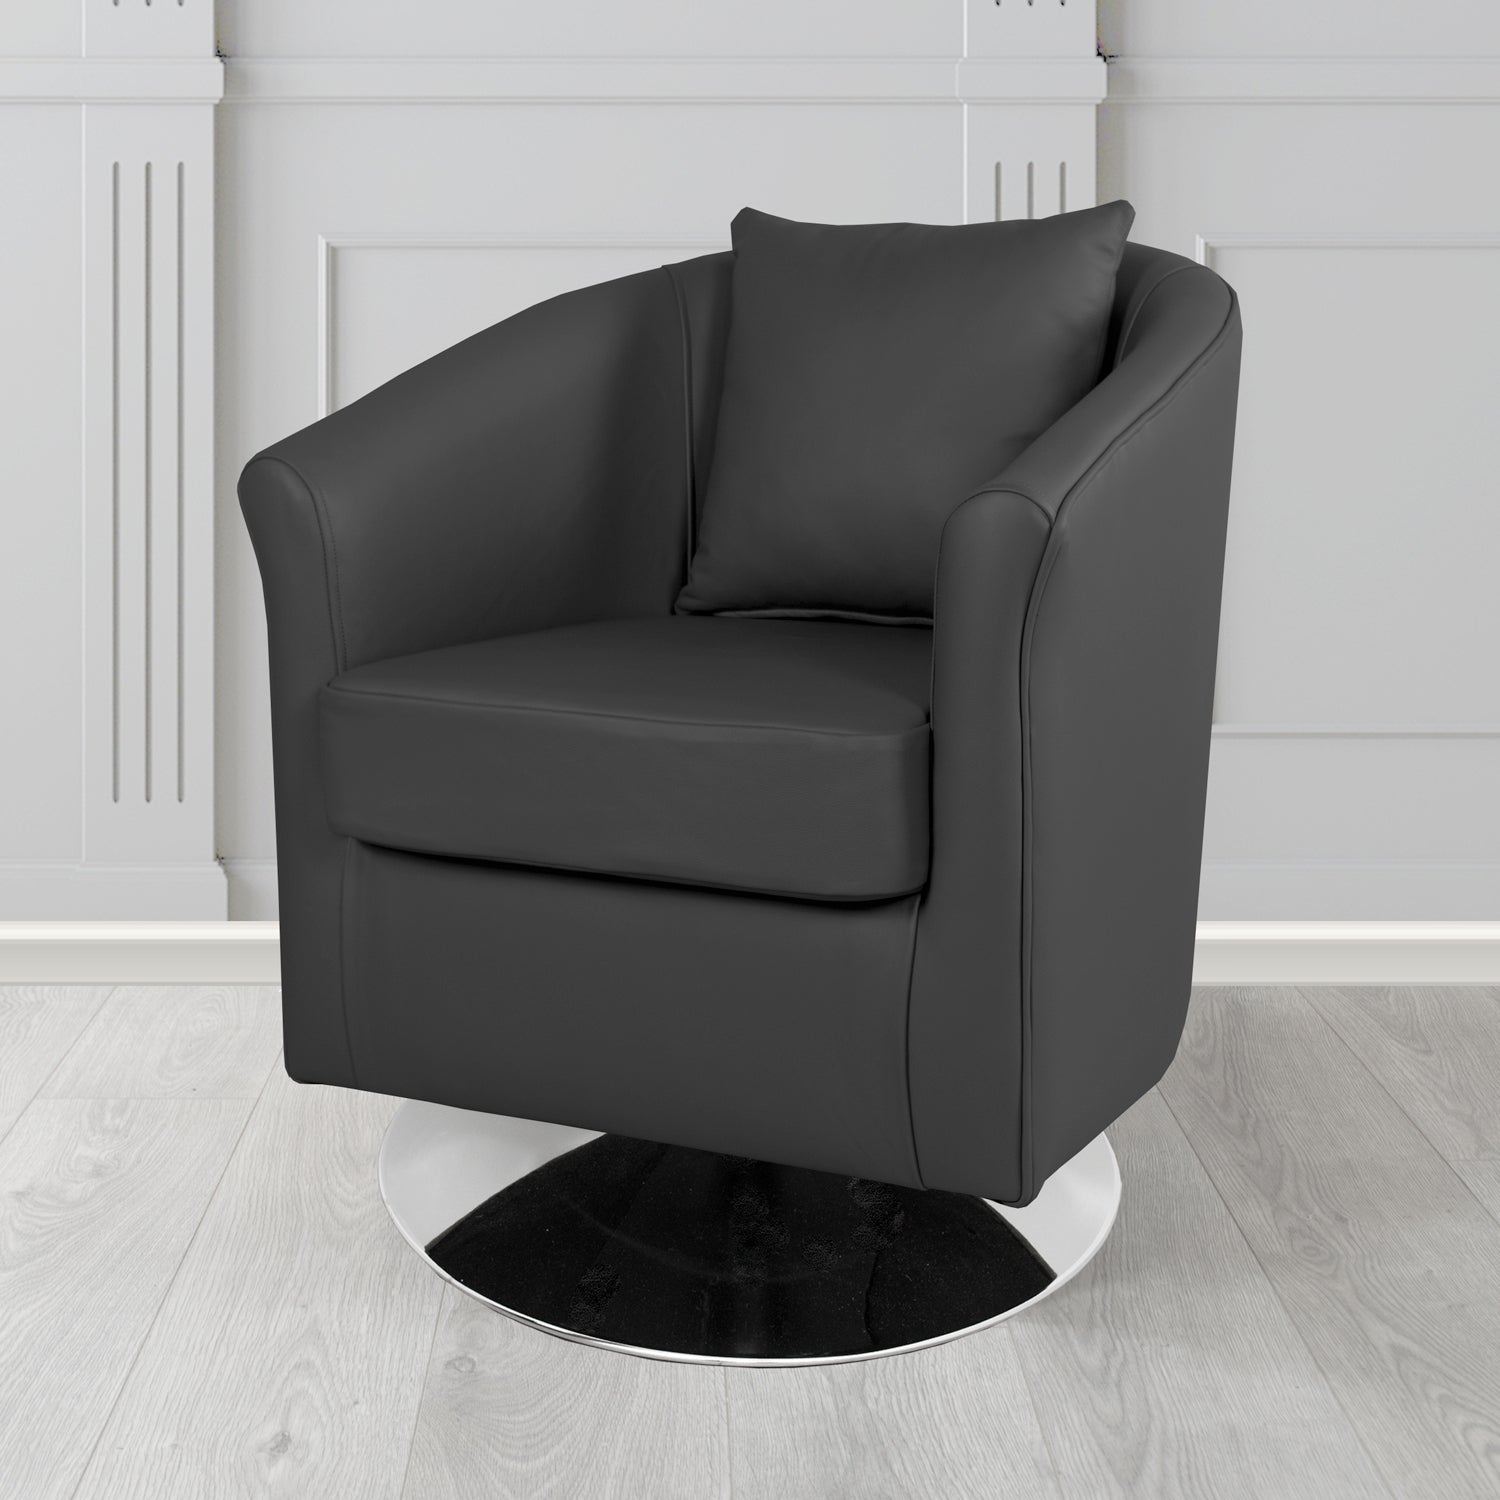 St Tropez Swivel Tub Chair in Contempo Black Crib 5 Genuine Leather with Scatter Cushion